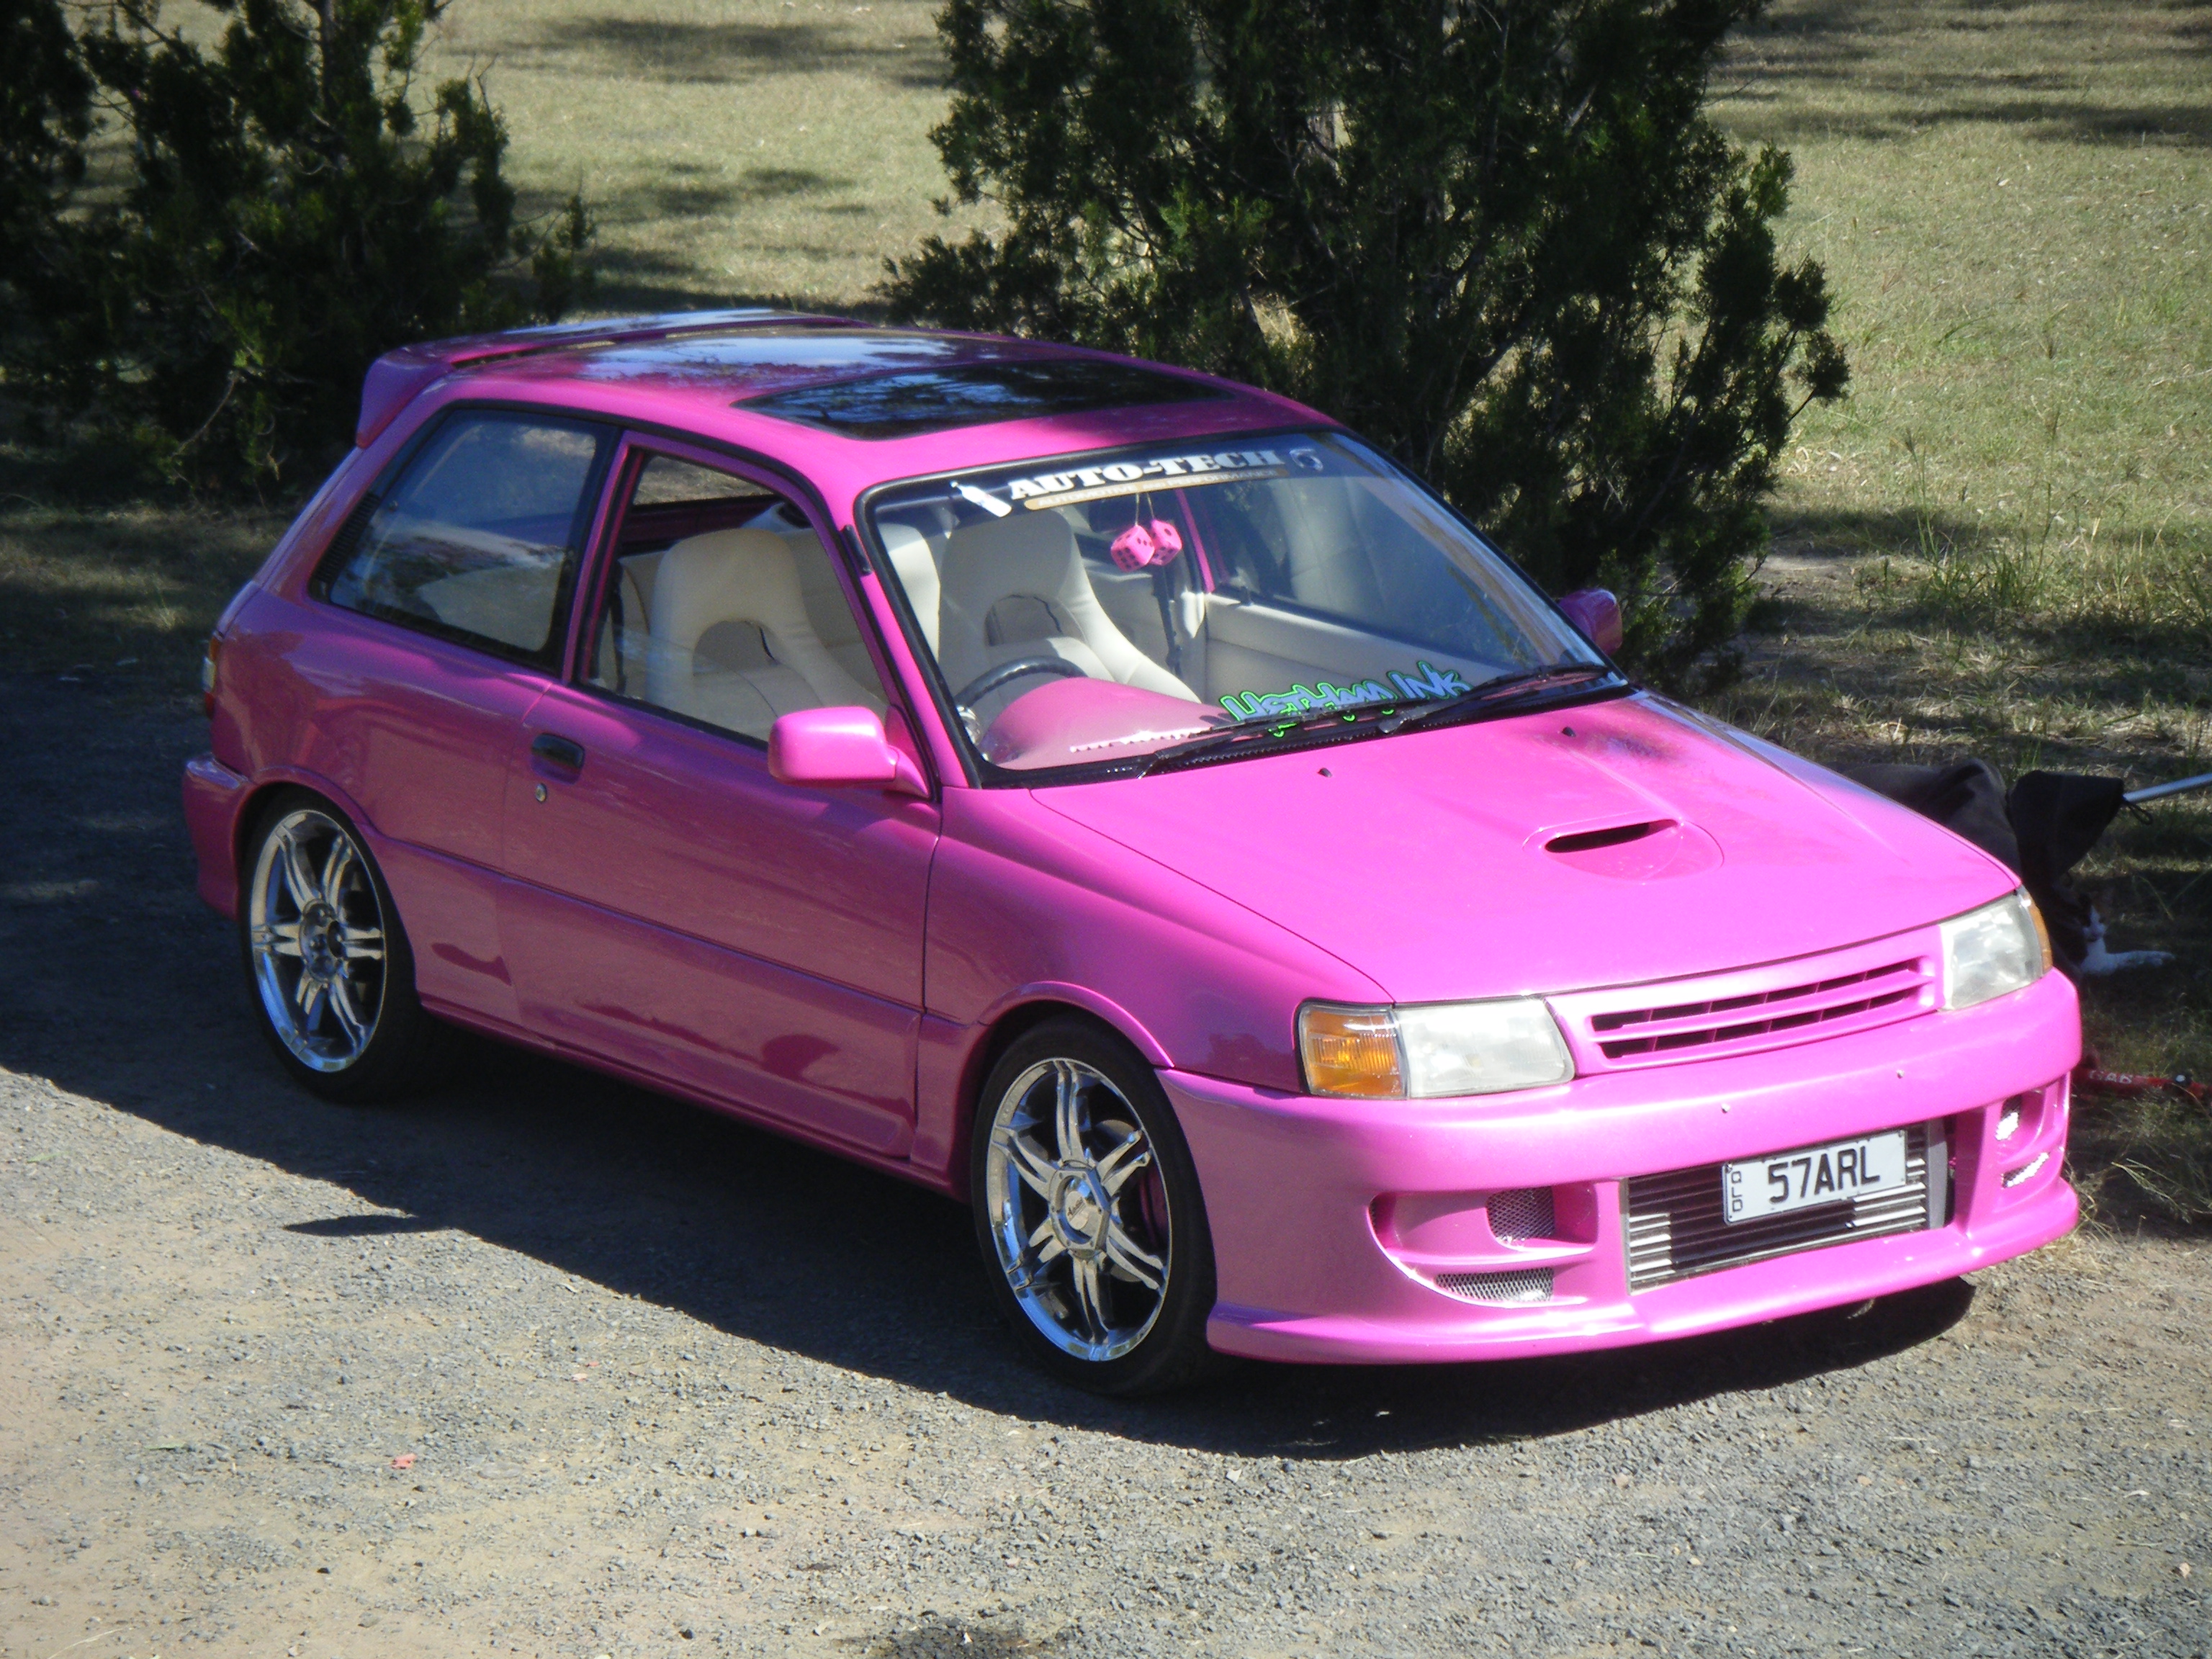 Toyota Starlet 2004 Review, Amazing Pictures and Images Look at the car